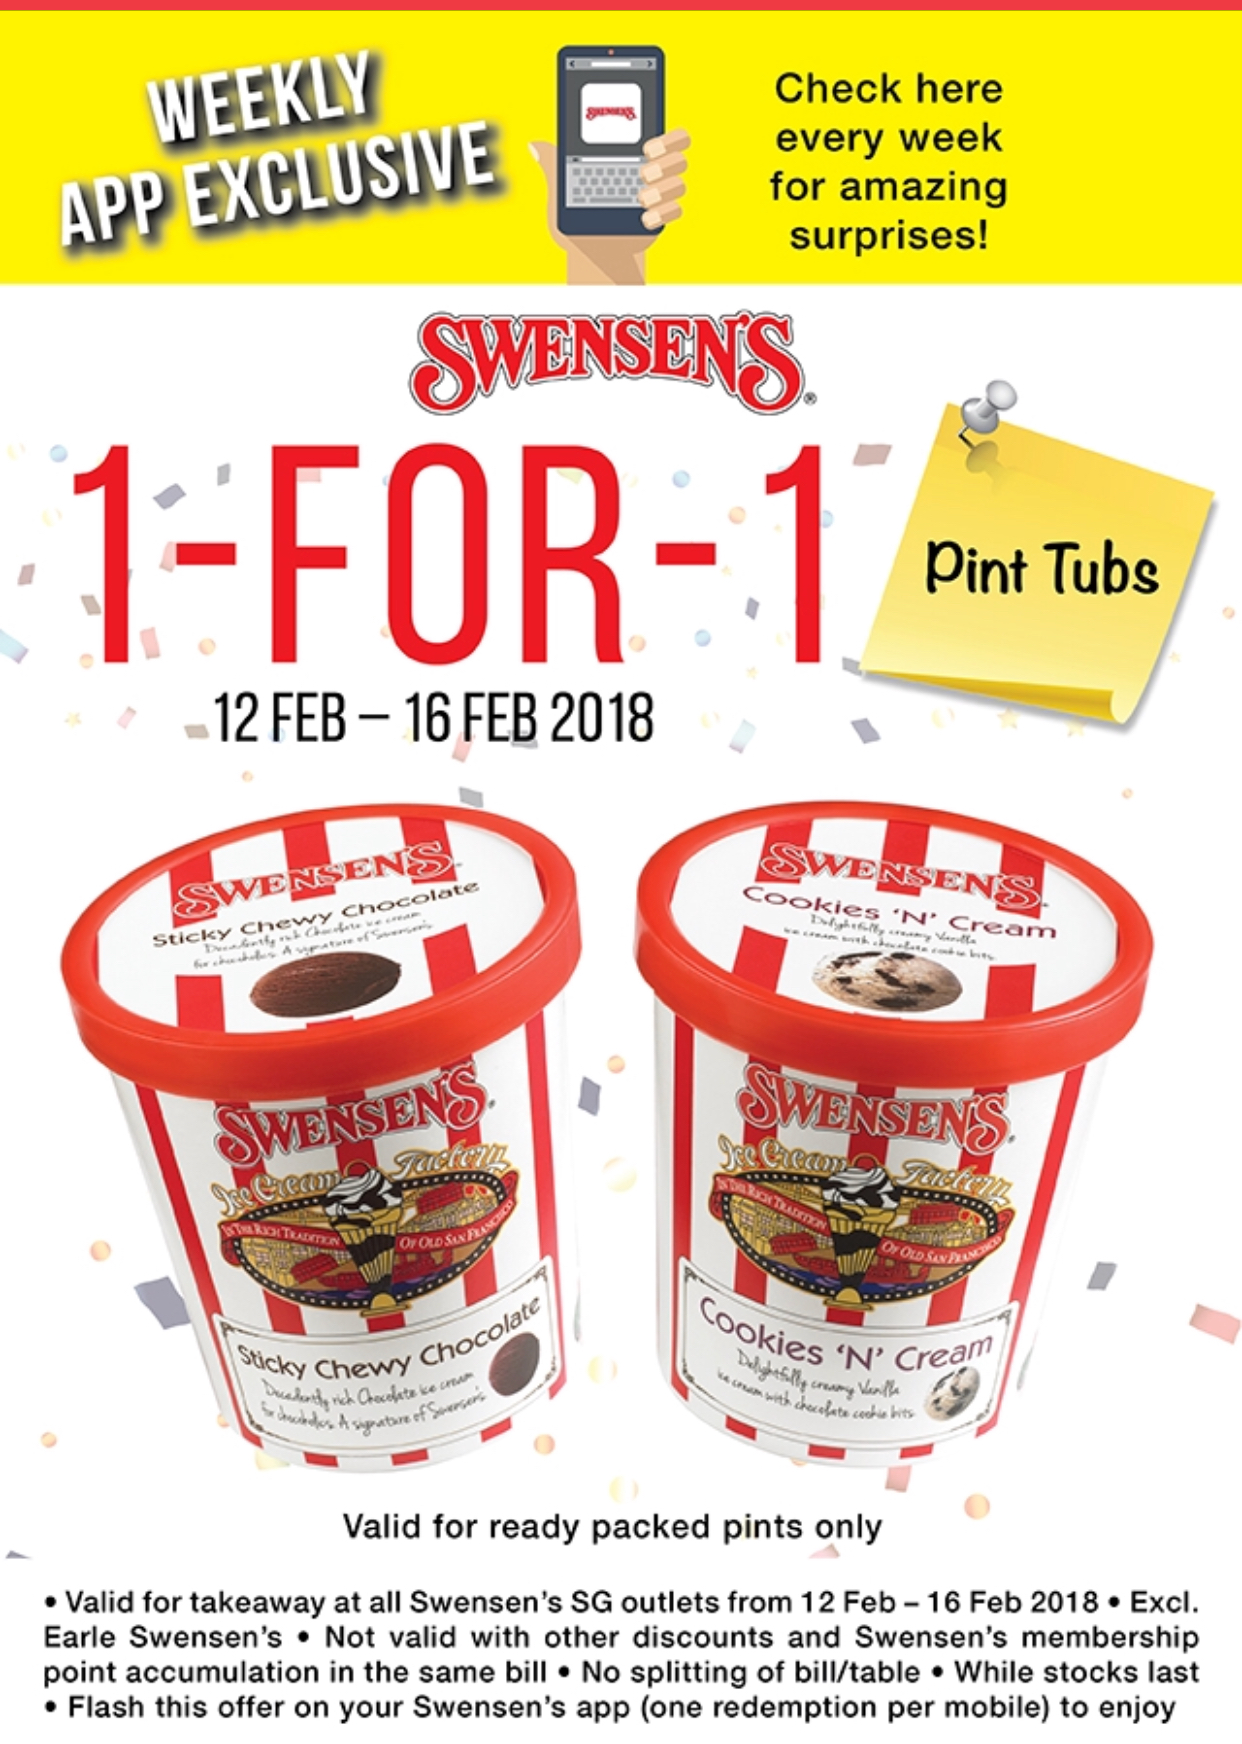 Swensen’s is offering 1-for-1 pint tubs at all outlets from 12 – 16 Feb 2018 - 1